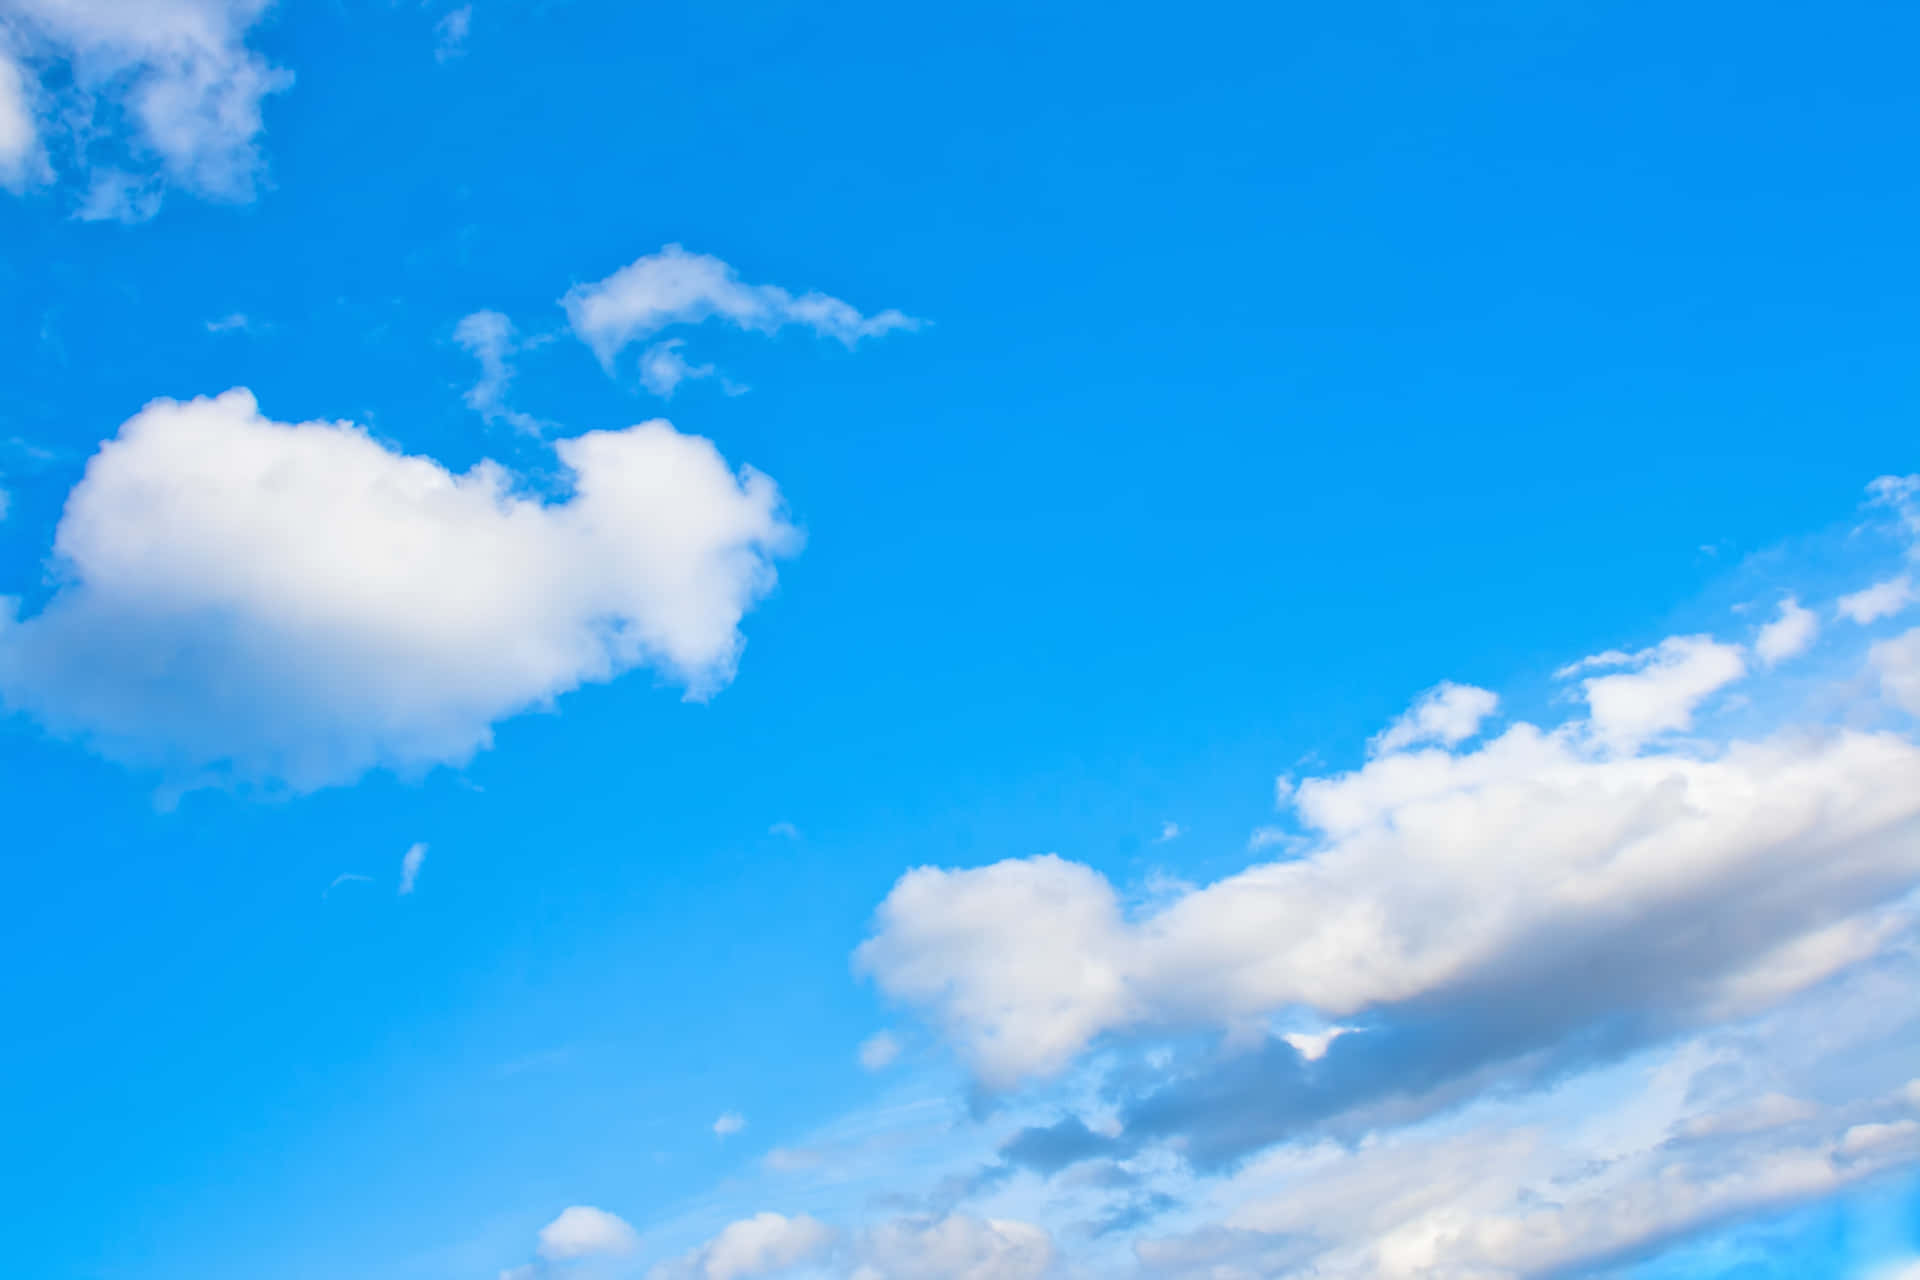 Take a break and enjoy the panoramic beauty of blue skies Wallpaper